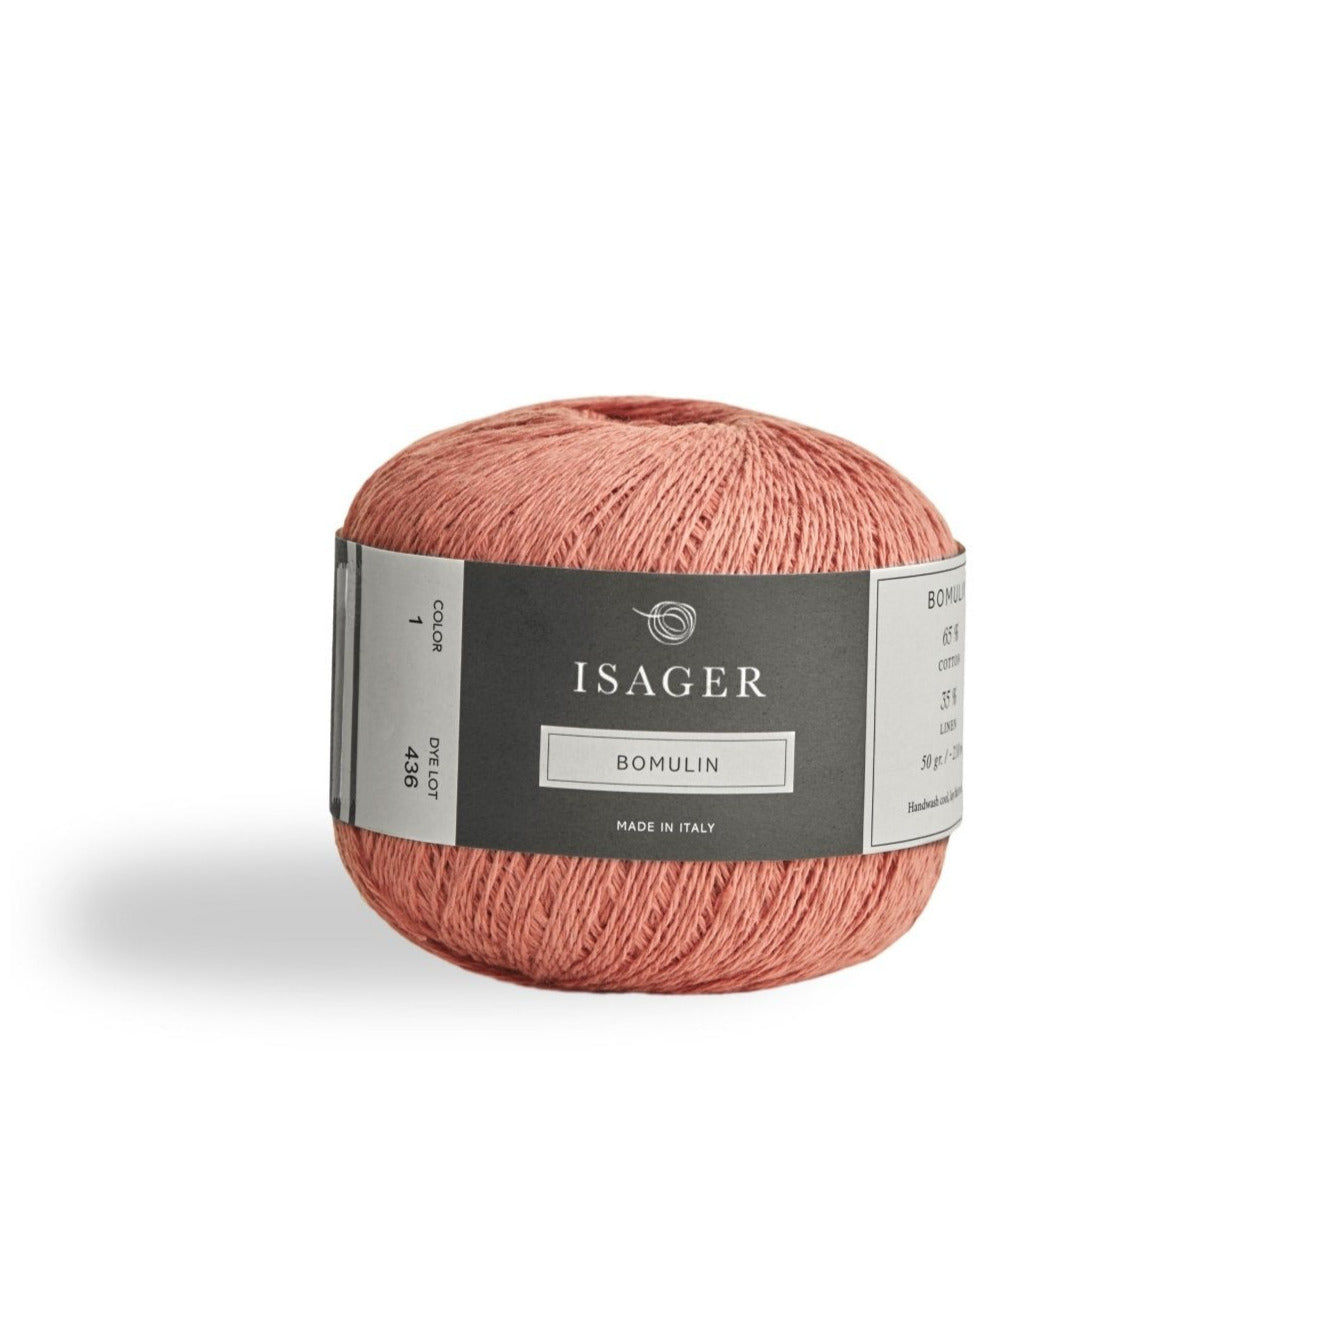 Isager Bomulin - 1 - 3 Ply - Cotton - The Little Yarn Store